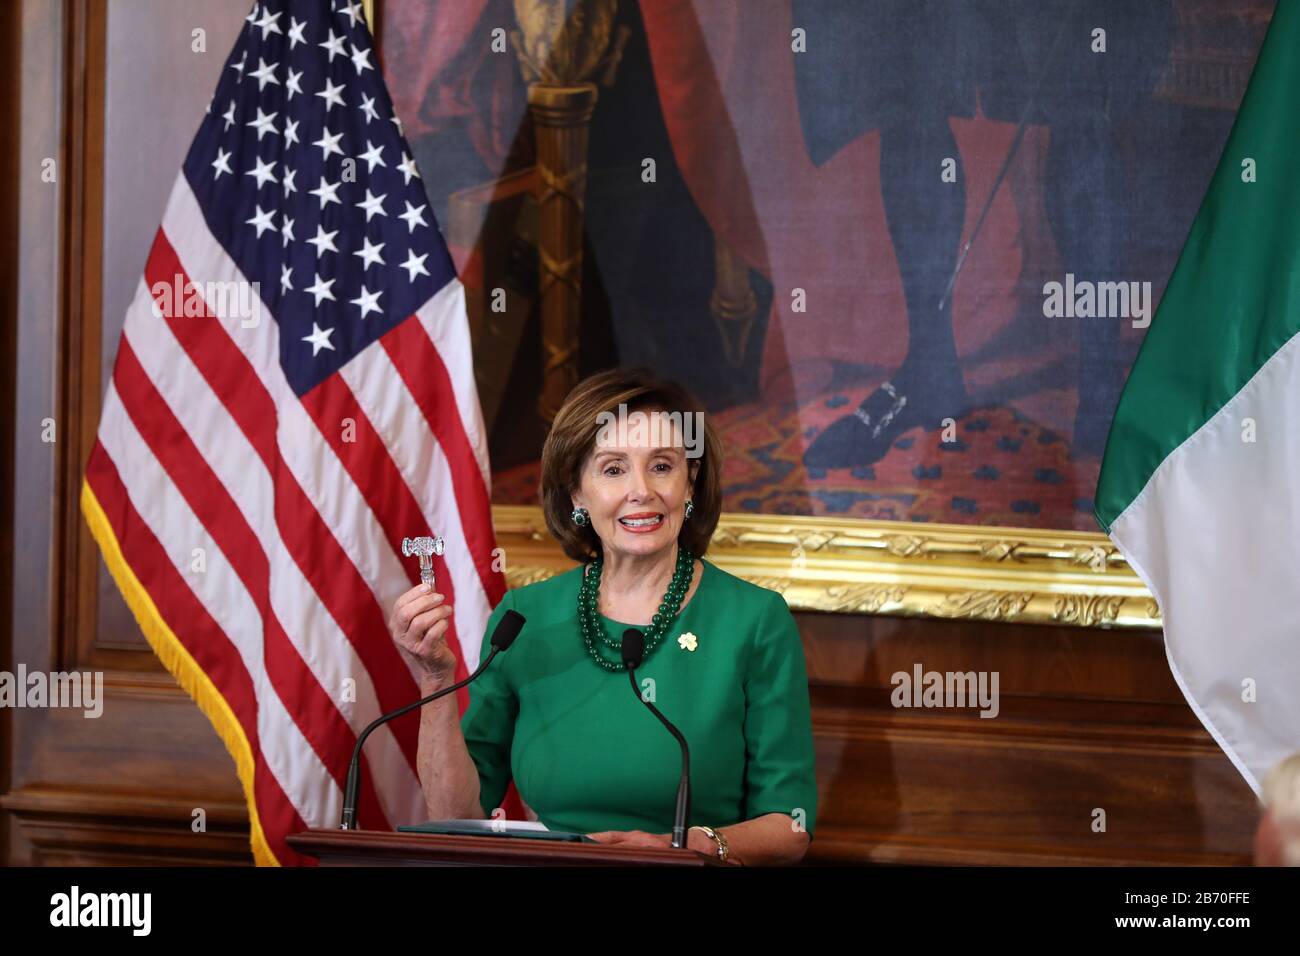 Nancy Pelosi, speaker of the United States House of Representatives, holds up a Waterford crystal gavel at the beginning of the Speaker???s luncheon on Capitol Hill in Washington DC during the Taoiseach's visit to the US. Stock Photo